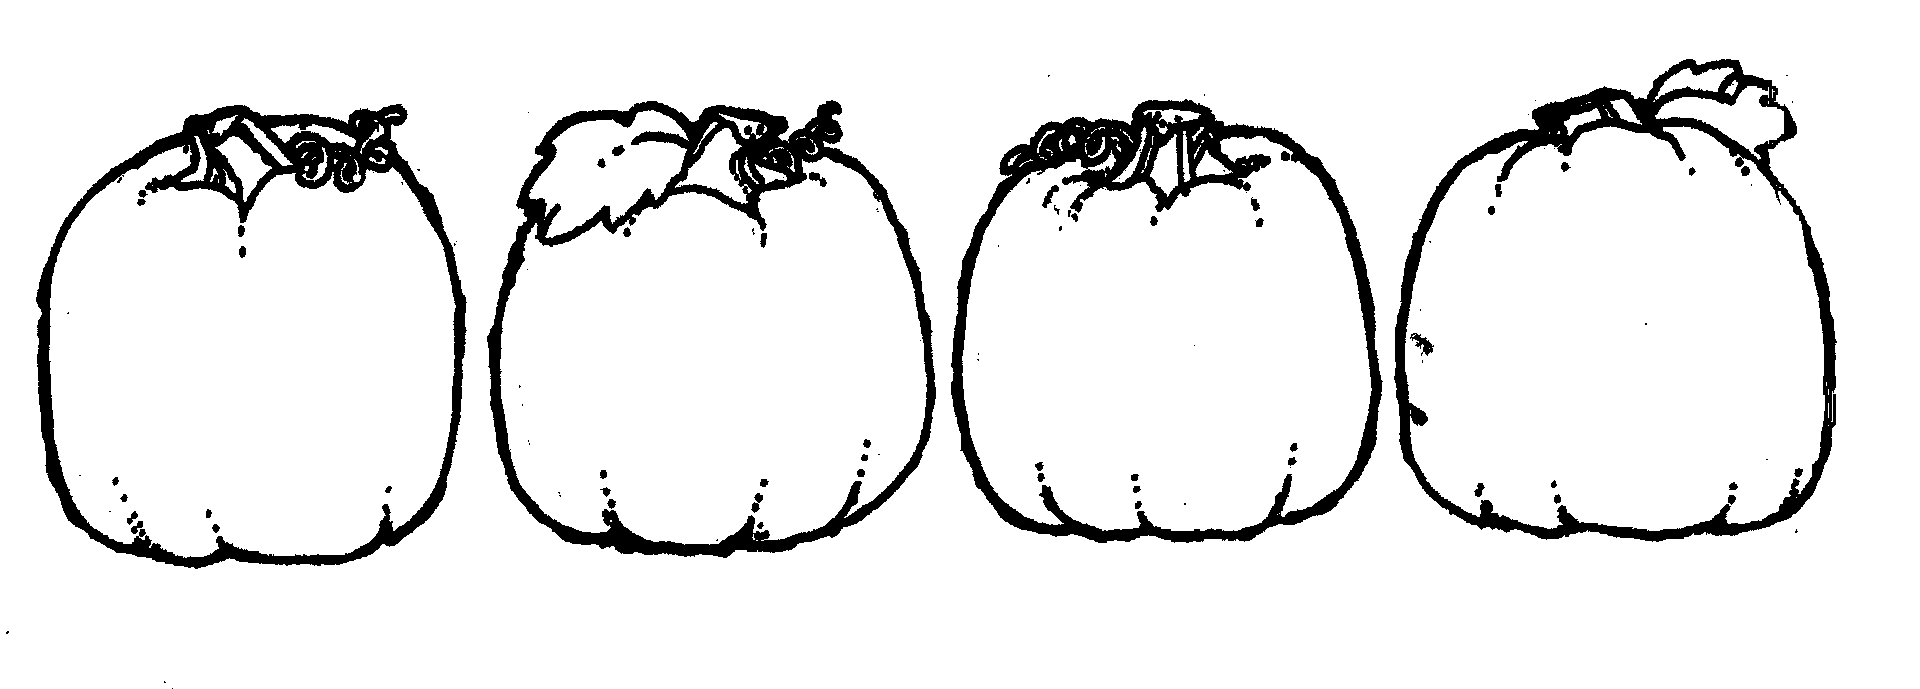 Pumpkin Clip Art Black And White | Clipart library - Free Clipart Images